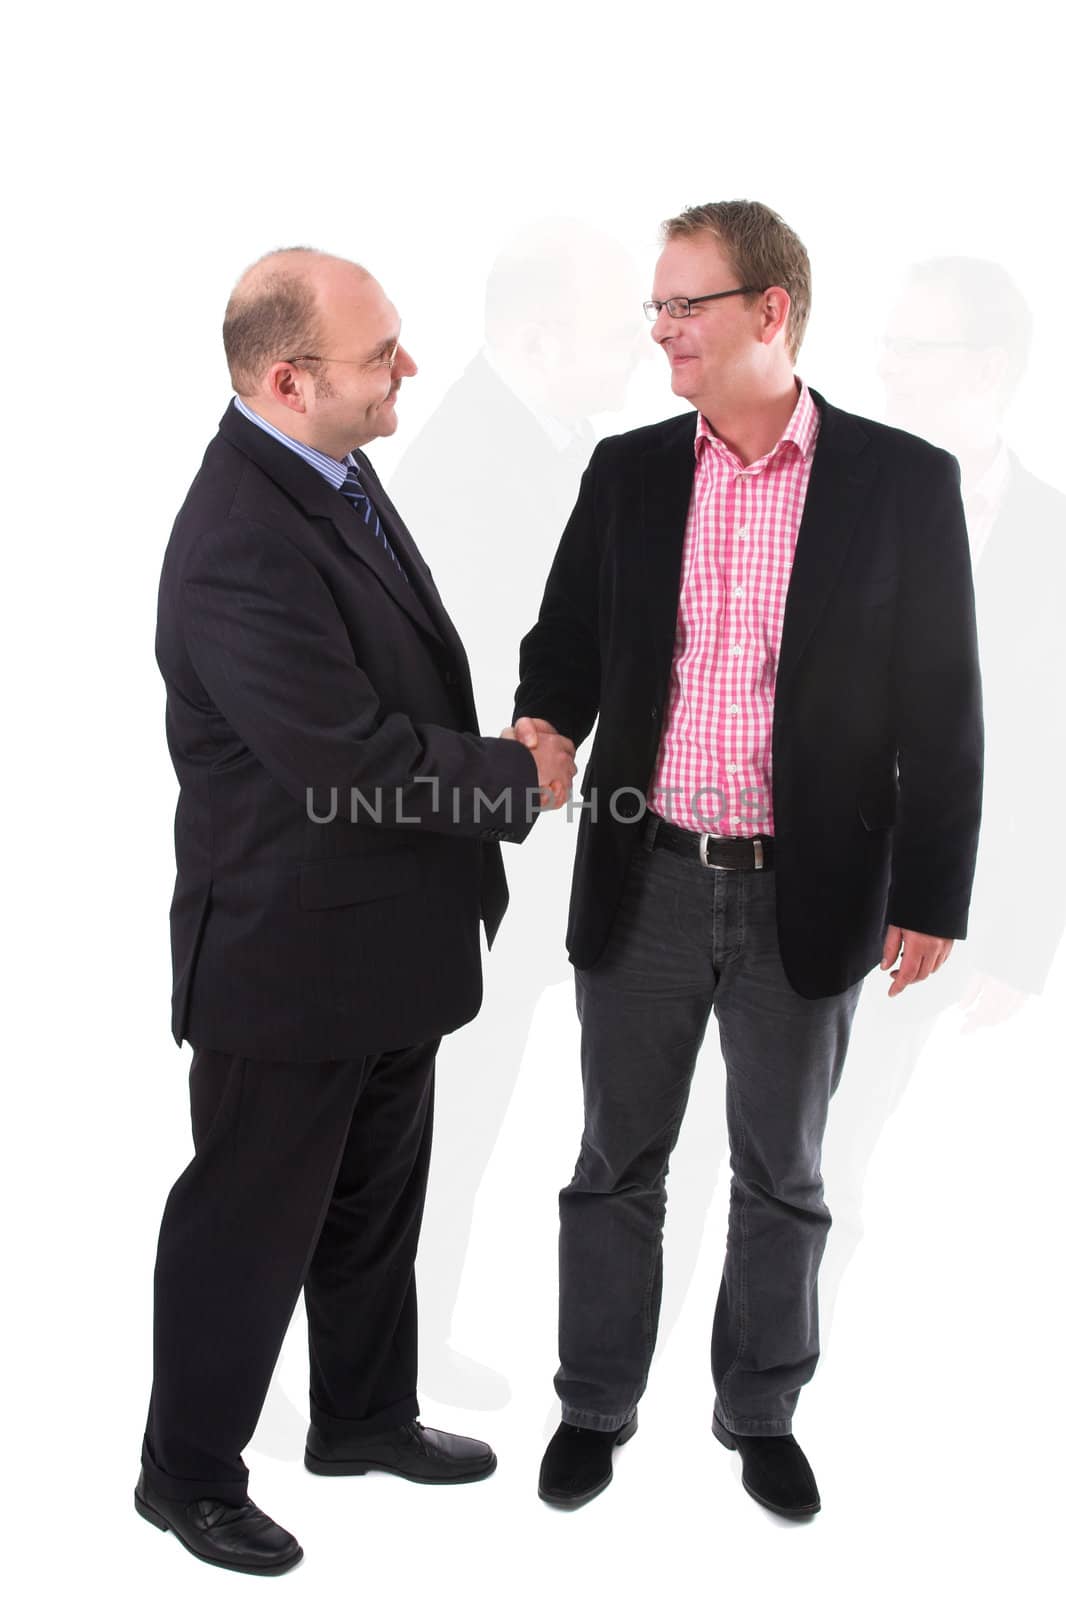 Two businessman having just come to an agreement and shaking eachother's hand on the deal